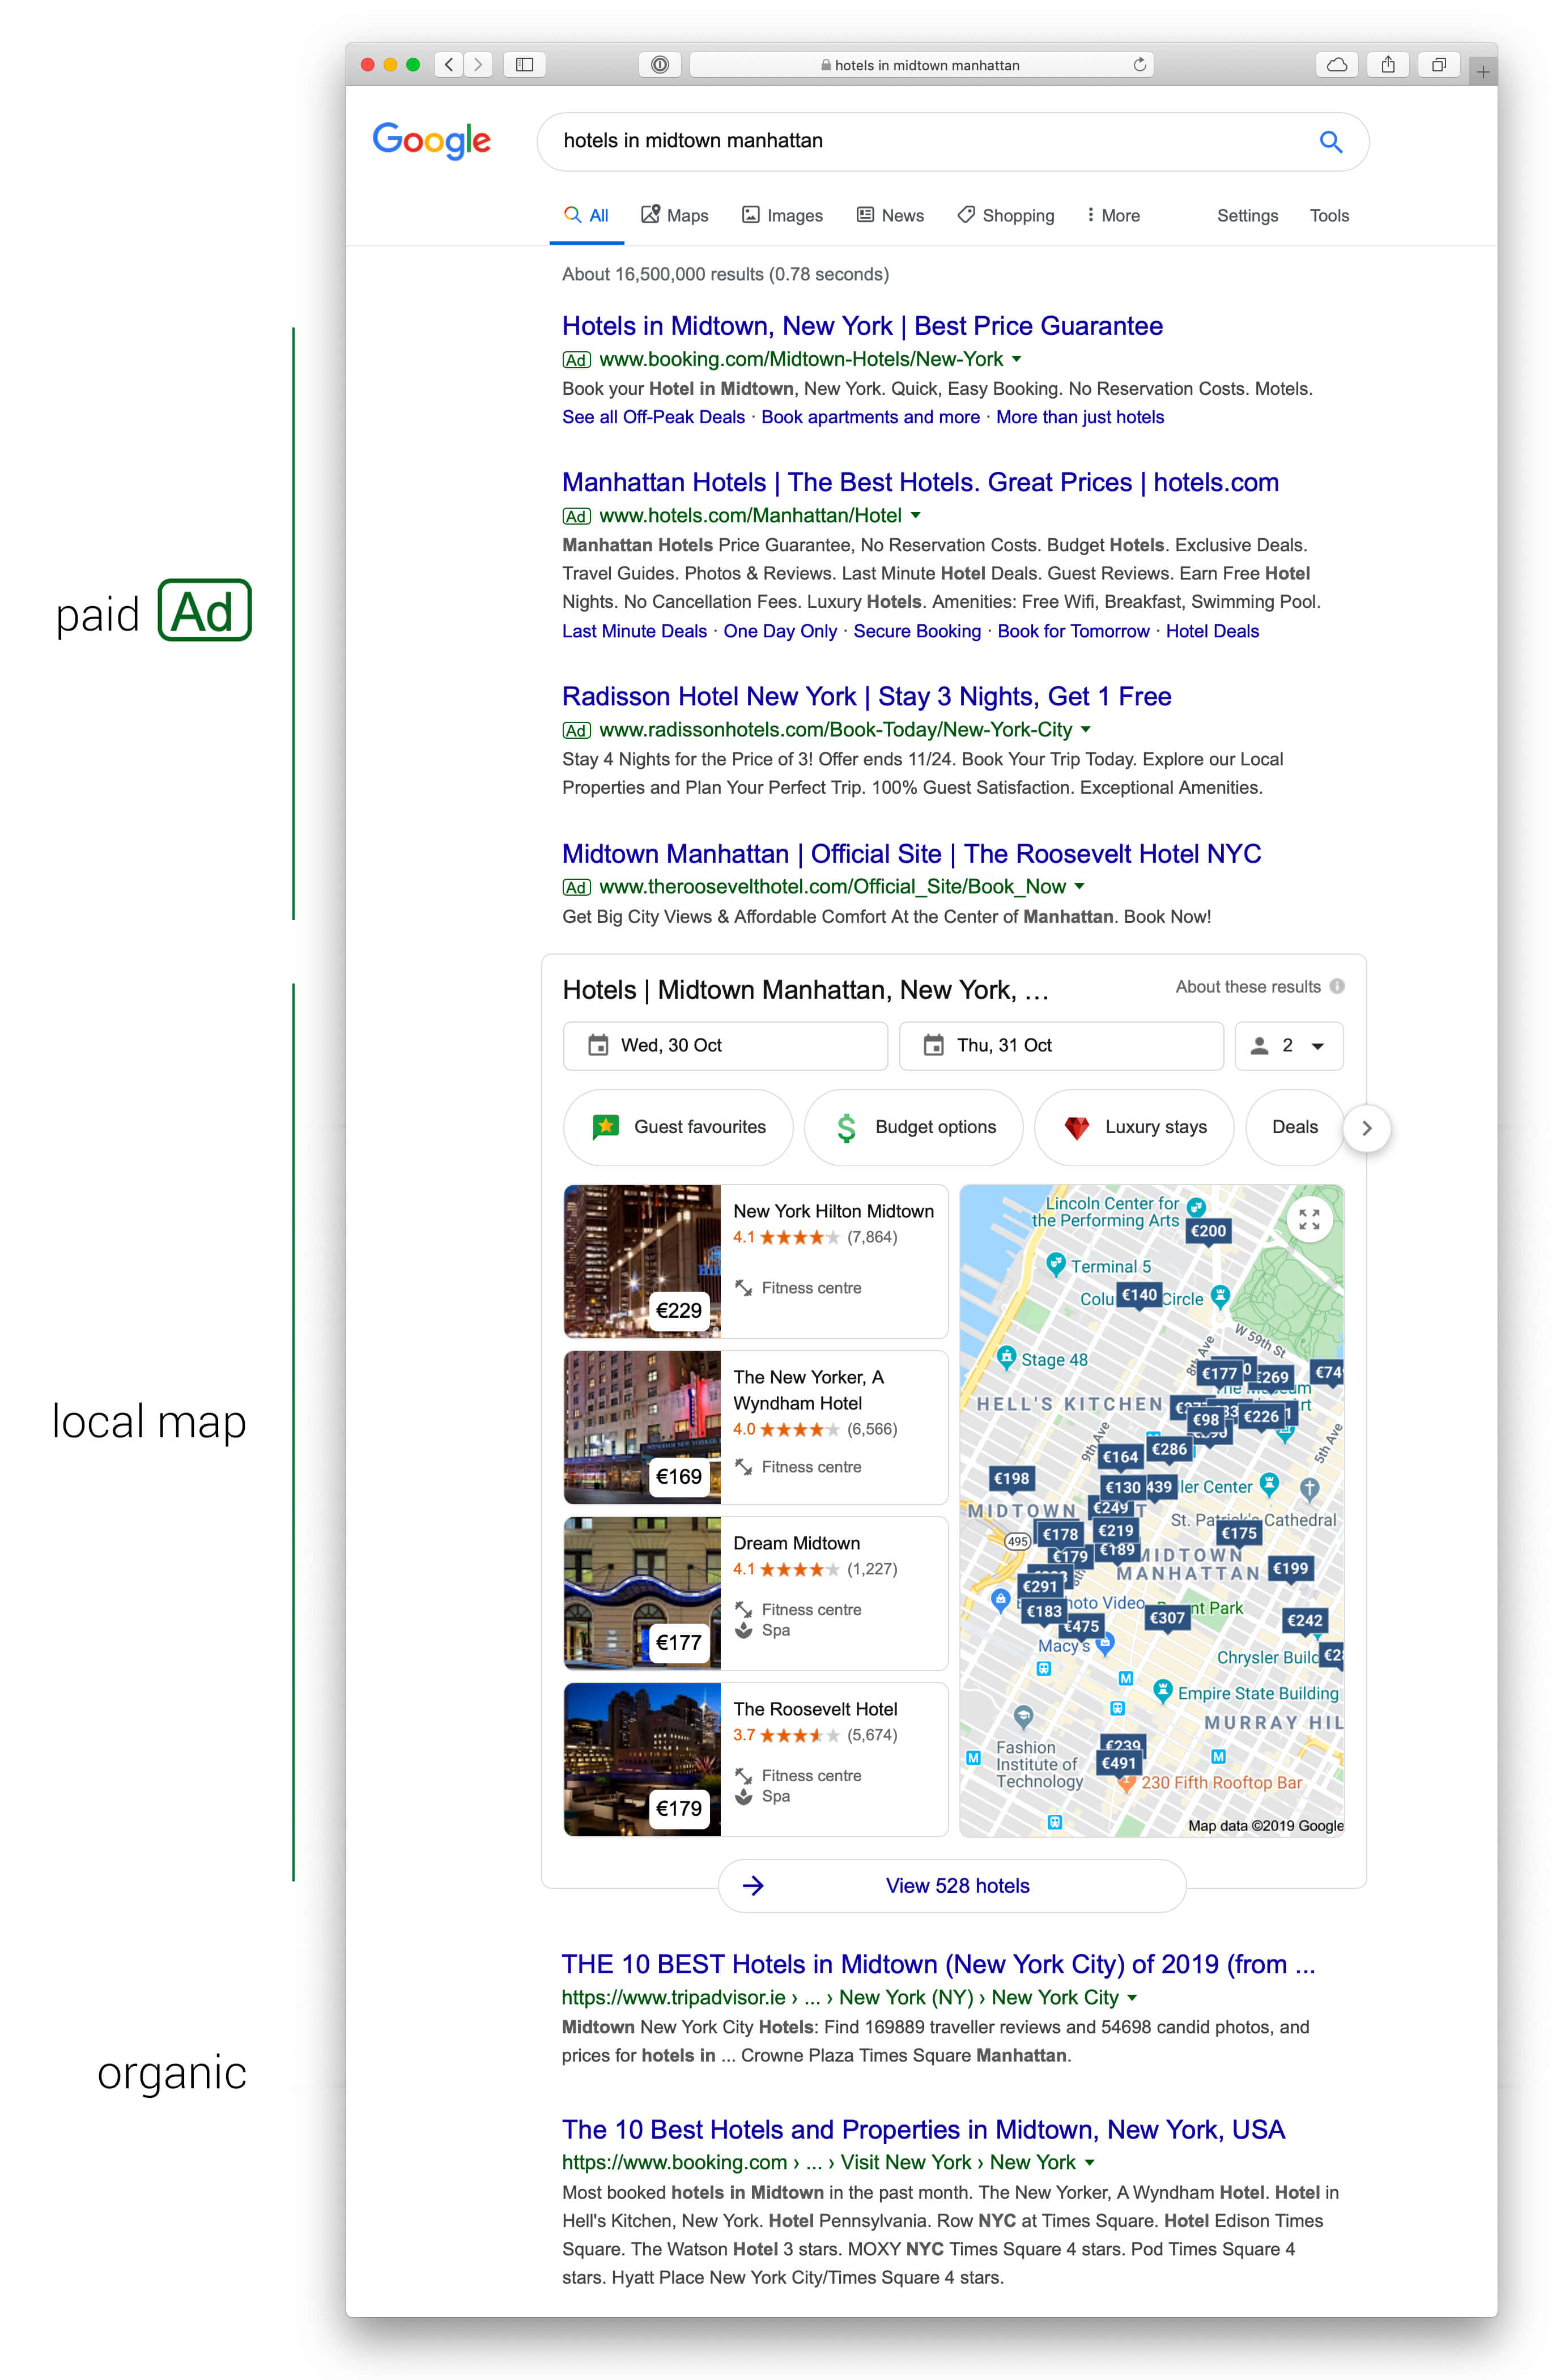 A search for hotels in Midtown Manhattan showing paid results in the first four placements followed by the local map results. Organic search results appear toward the bottom of the page.